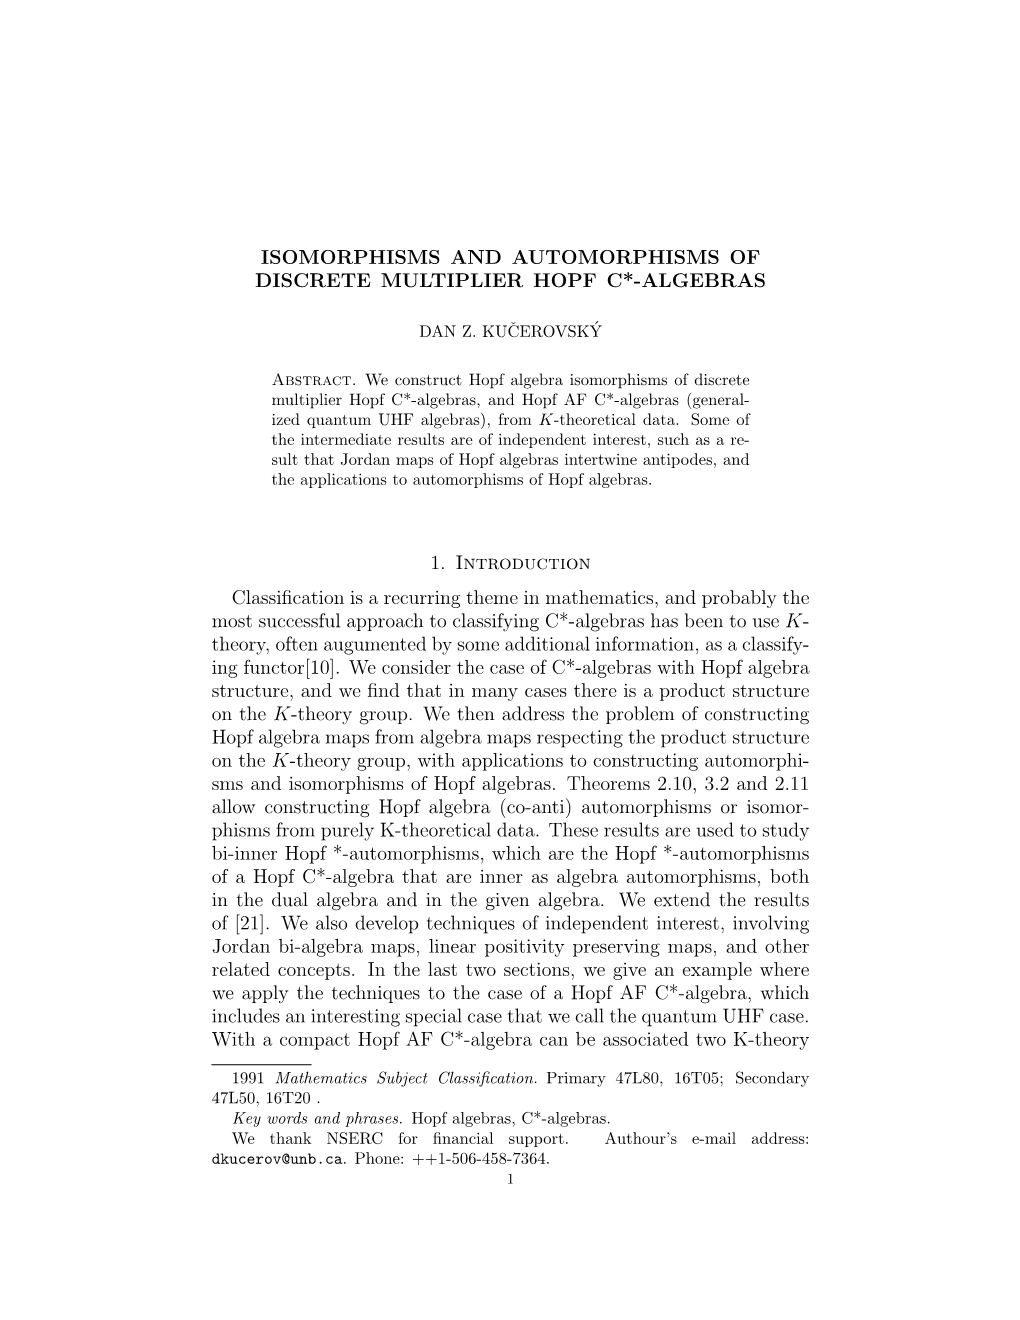 ISOMORPHISMS and AUTOMORPHISMS of DISCRETE MULTIPLIER HOPF C*-ALGEBRAS 1. Introduction Classification Is a Recurring Theme in Ma